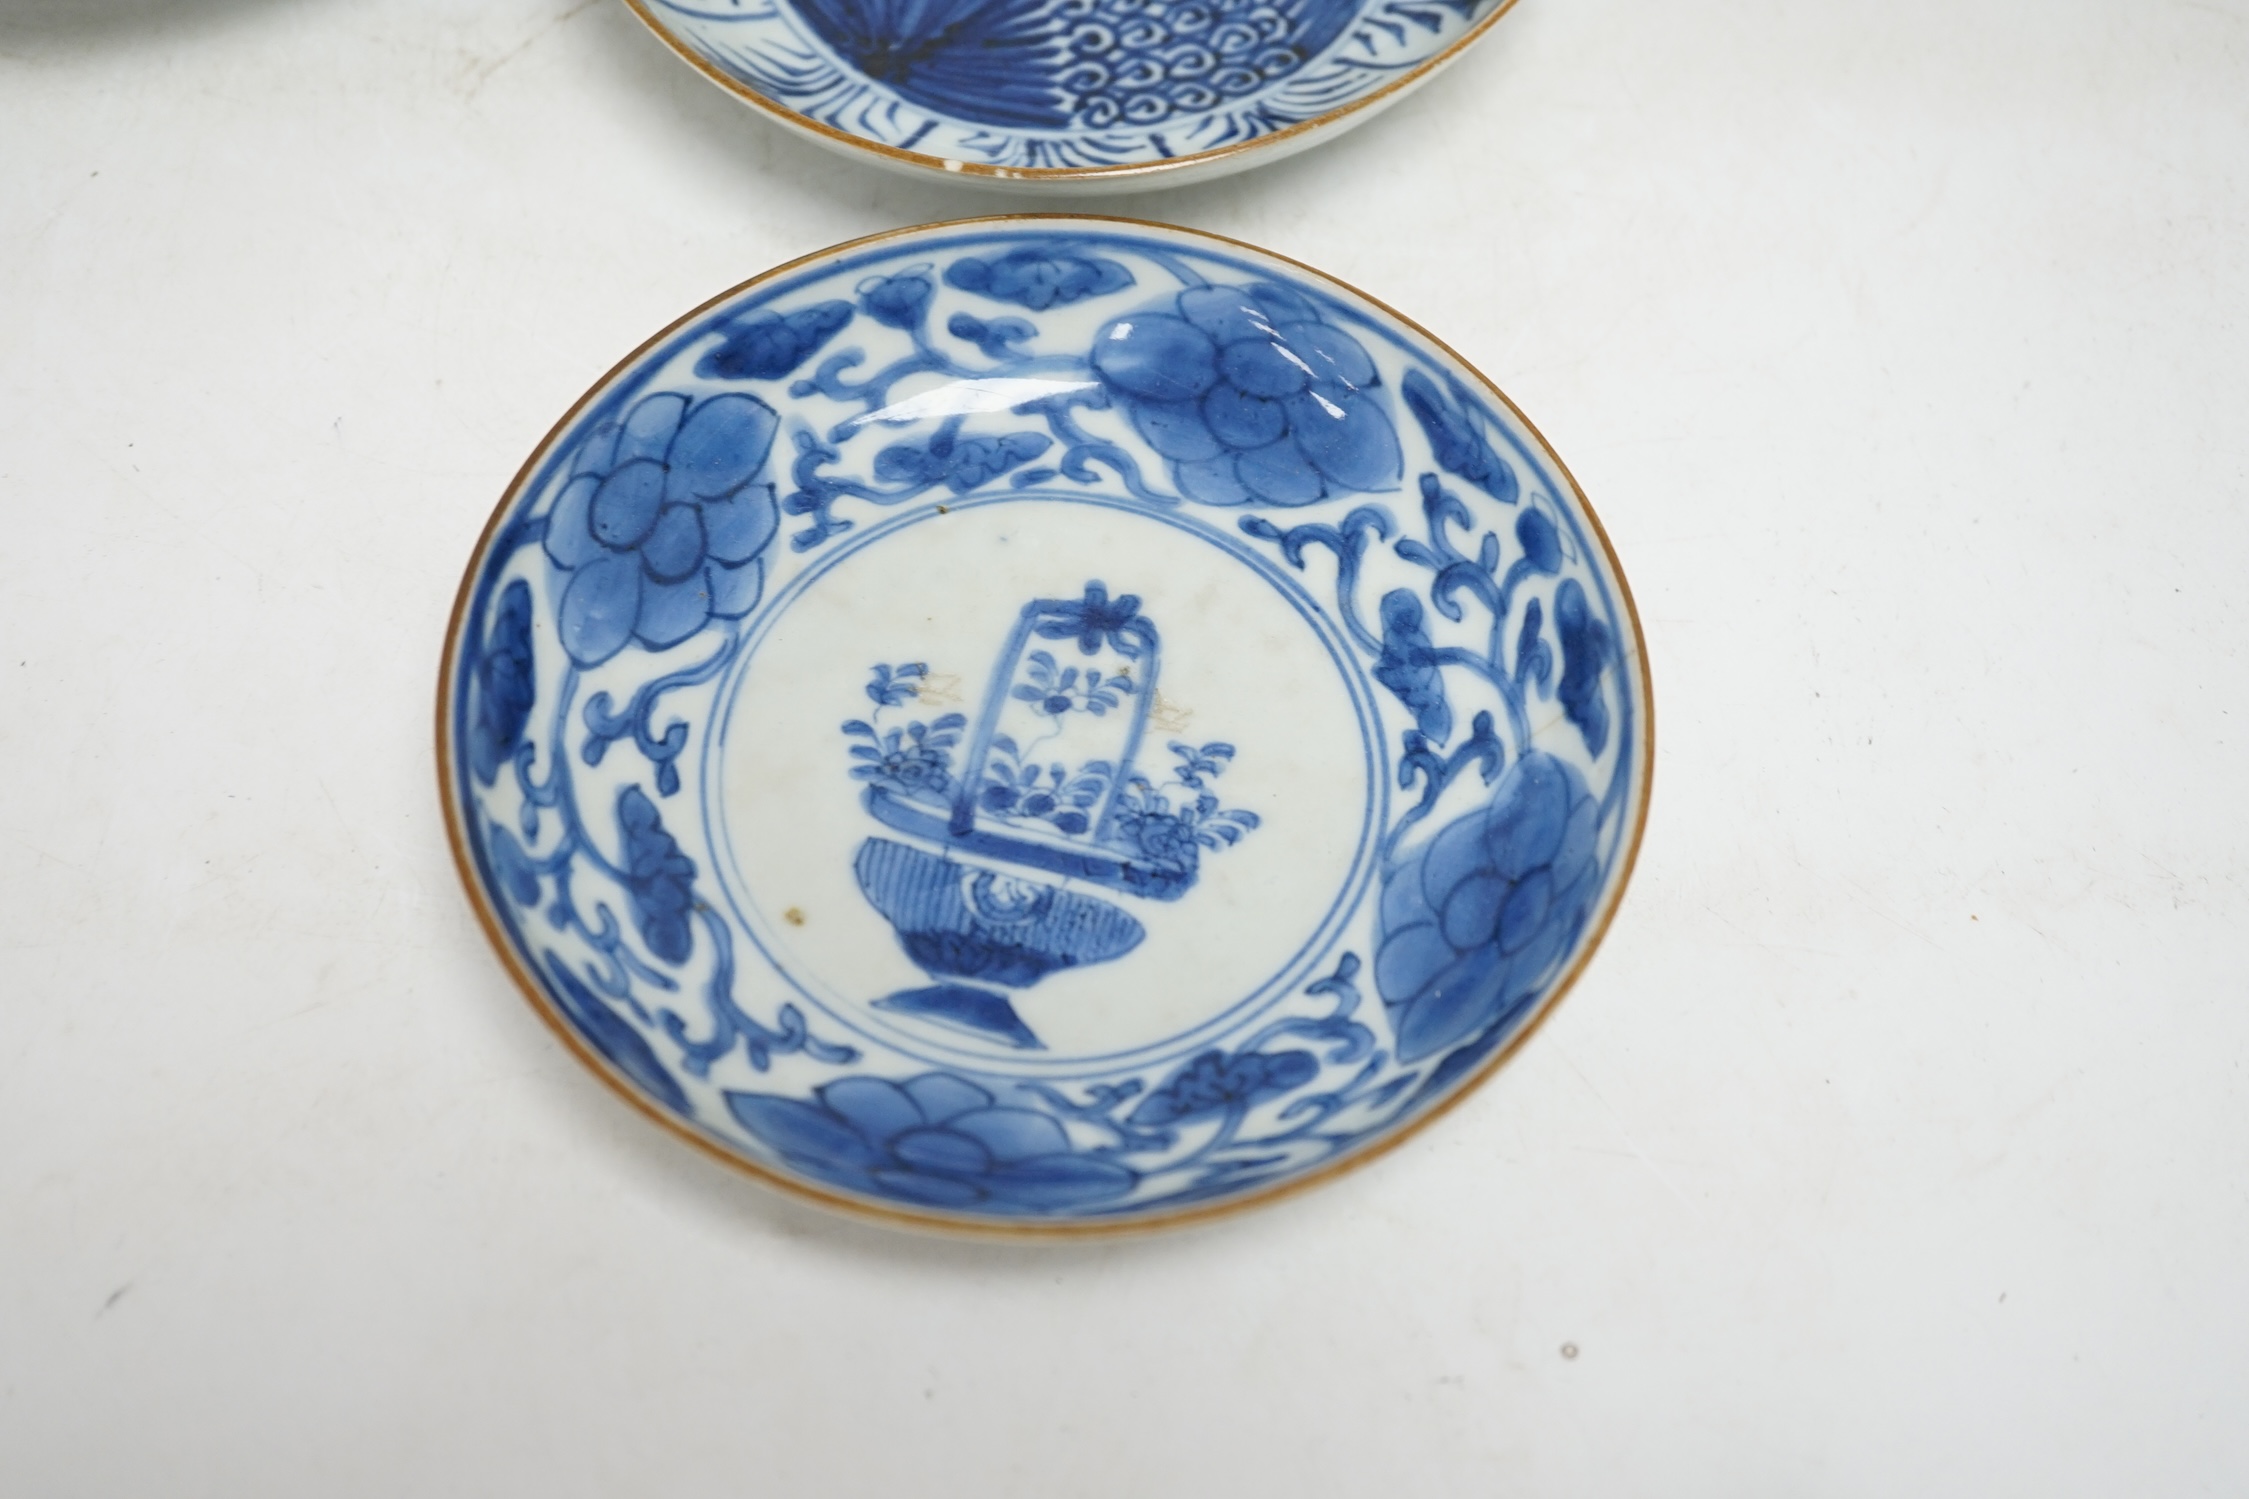 Five variously patterned Chinese blue and white saucer dishes, Kangxi period, largest 16cm diameter. Condition - chips and cracks to three items